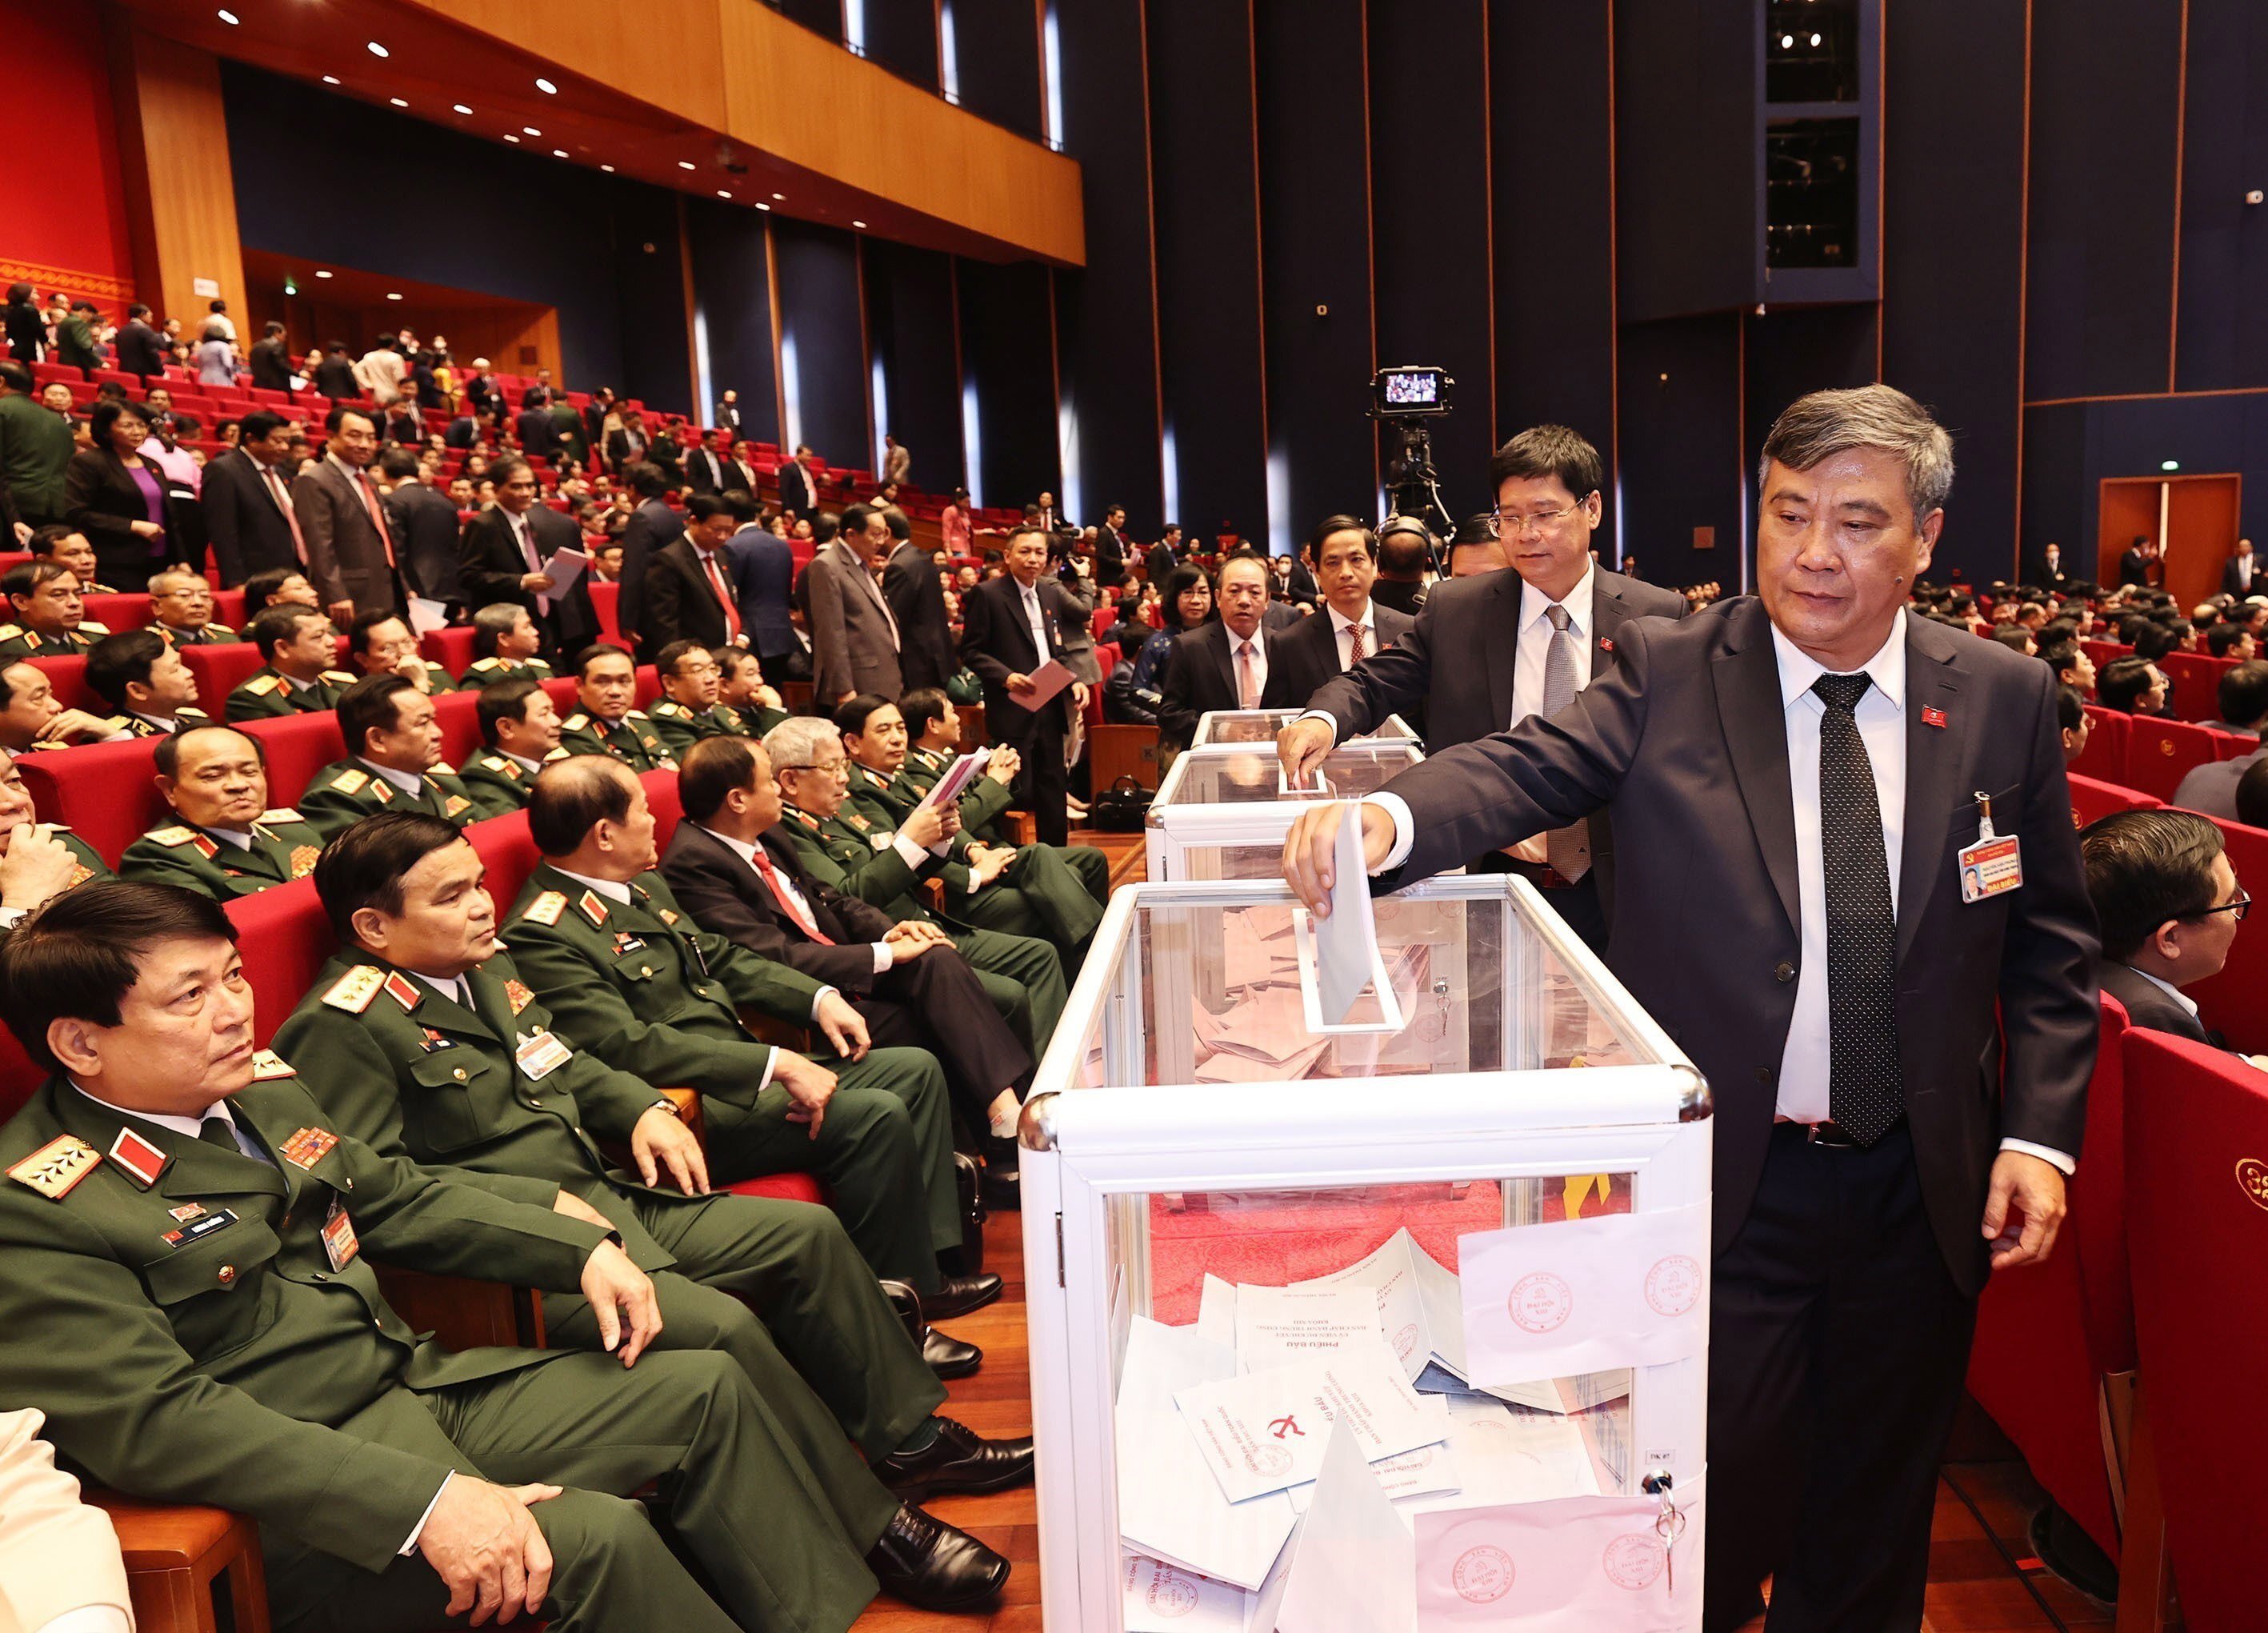 Delegates cast their votes during the 13th National Congress of Vietnam’s Communist Party in Hanoi on January 30. The military has gained more influence in the country’s political system. Photo: EPA-EFE